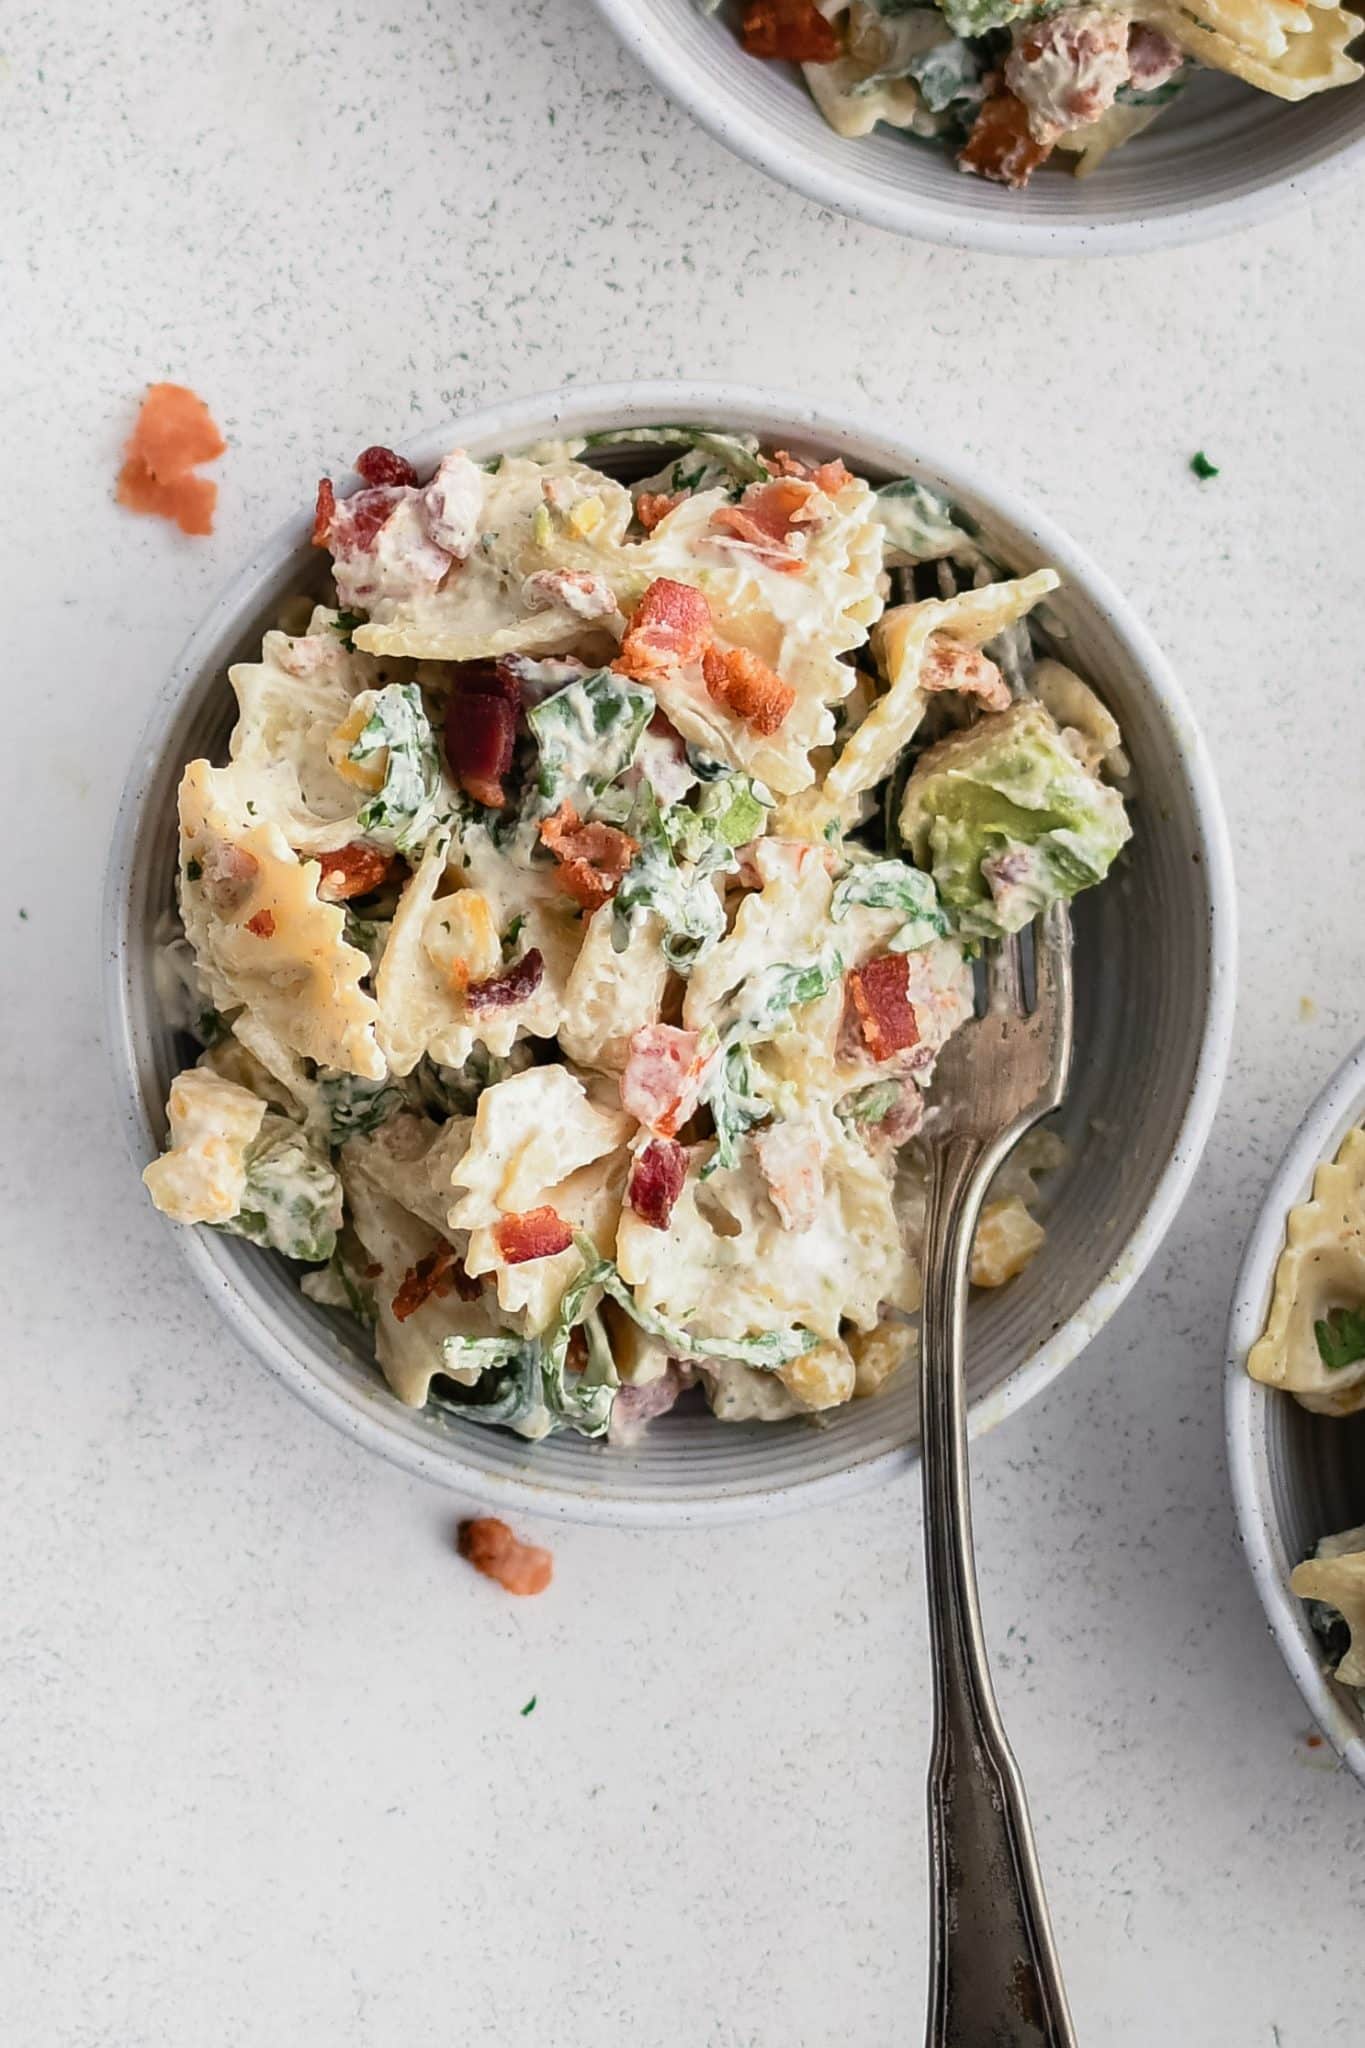 Small serving bowl filled with creamy BLT pasta salad made with bowtie pasta, arugula, avocado, tomato, bacon, and corn in a creamy mayo and sour cream dressing.